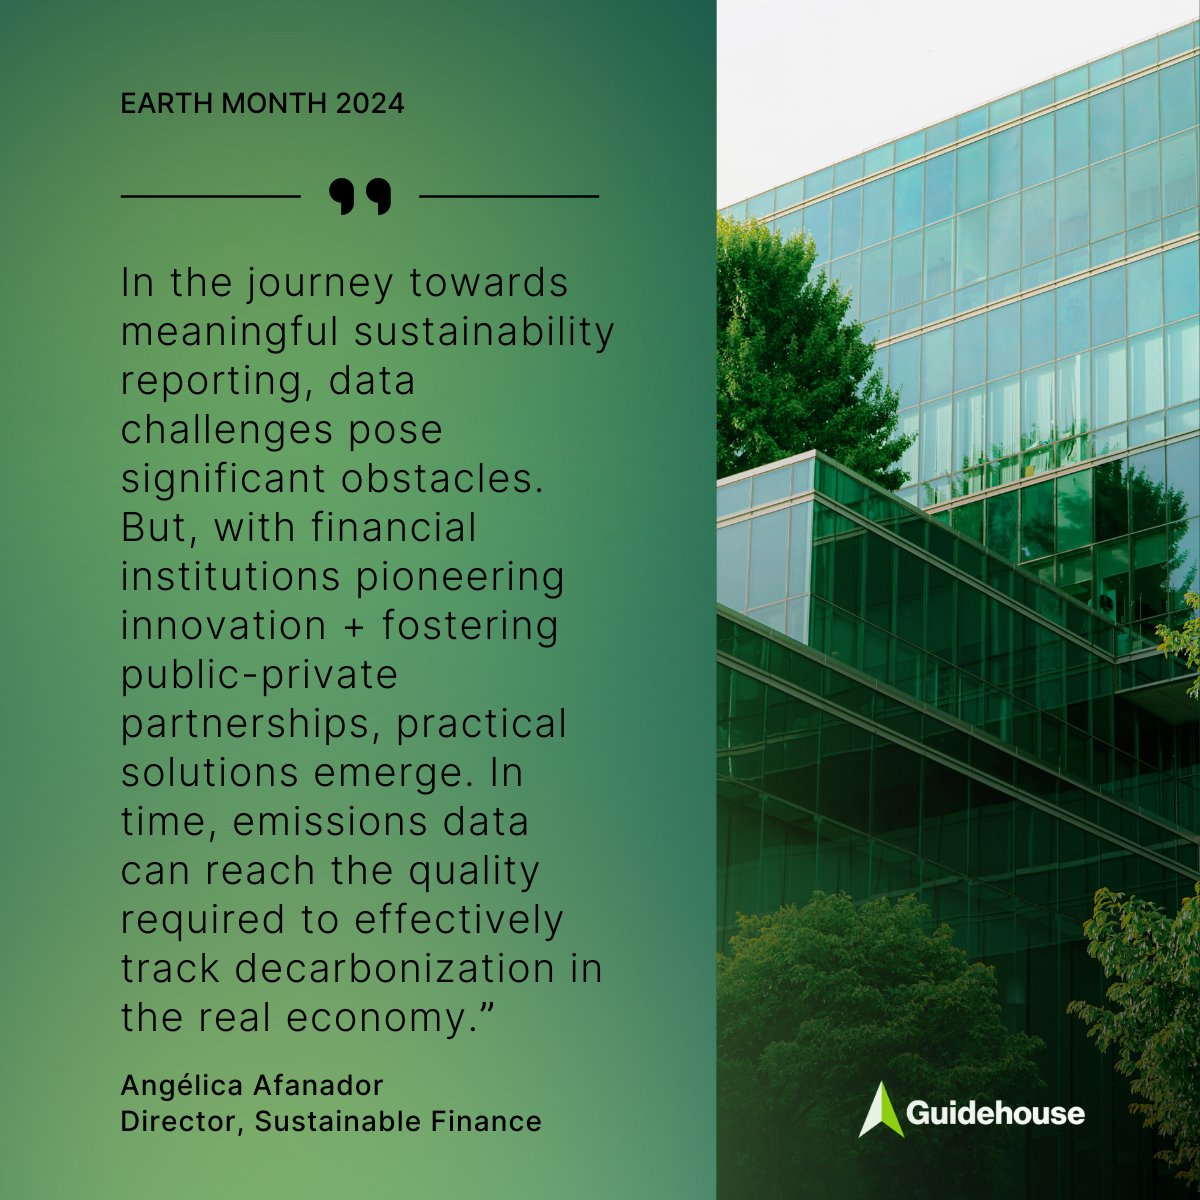 In a recent article published on @Reuters, our #GuidehouseExpert details the complexities of #PCAF reporting and delves into the challenges with disclosing carbon emissions in financial portfolios.

Learn more: guidehouse.com/insights/energ… 

#EarthMonth #ClimateAction